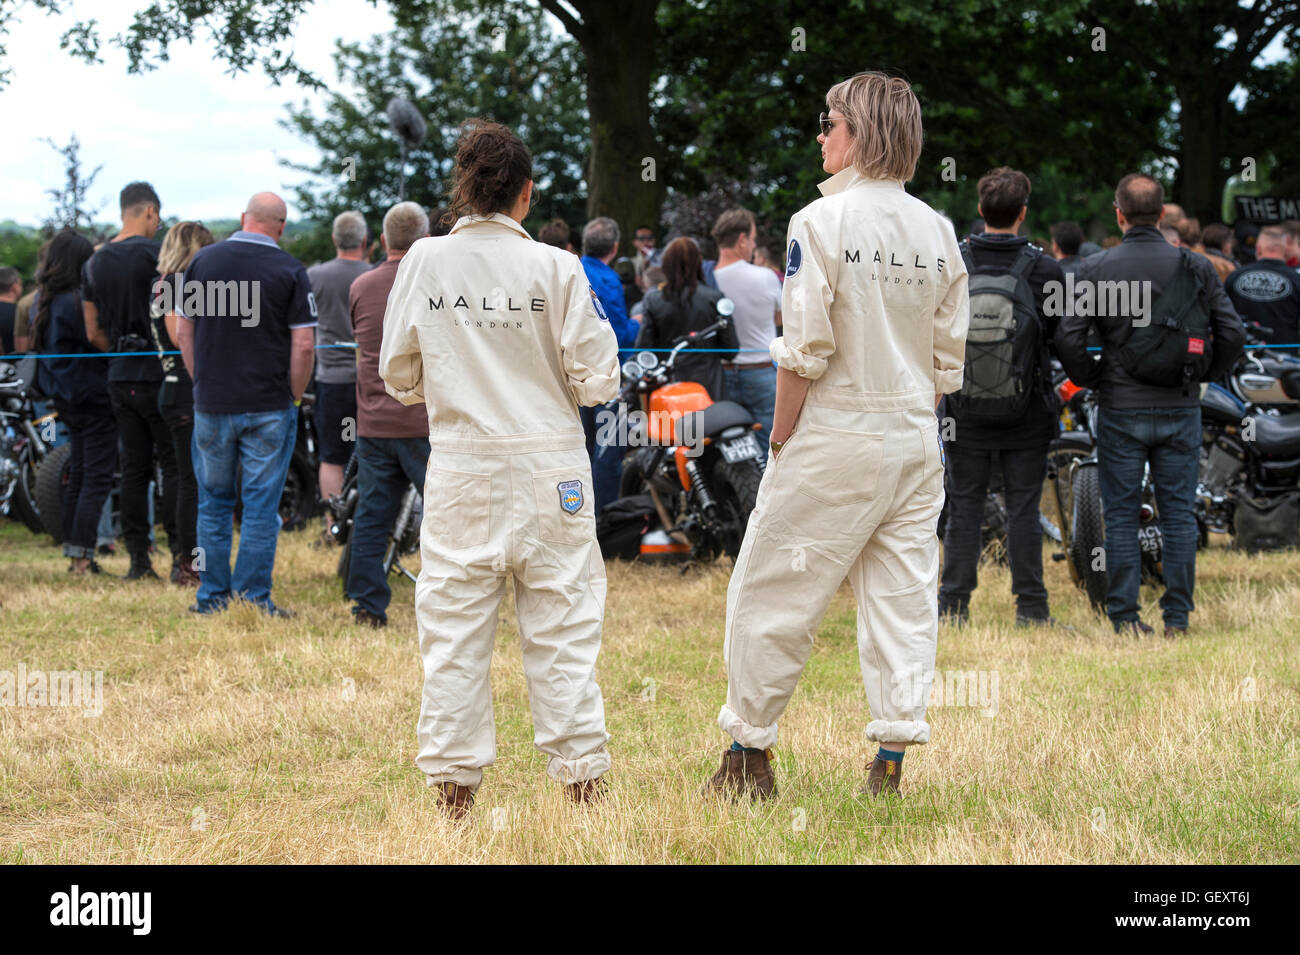 Female staff at Malle, The Mile Racing event. London Stock Photo